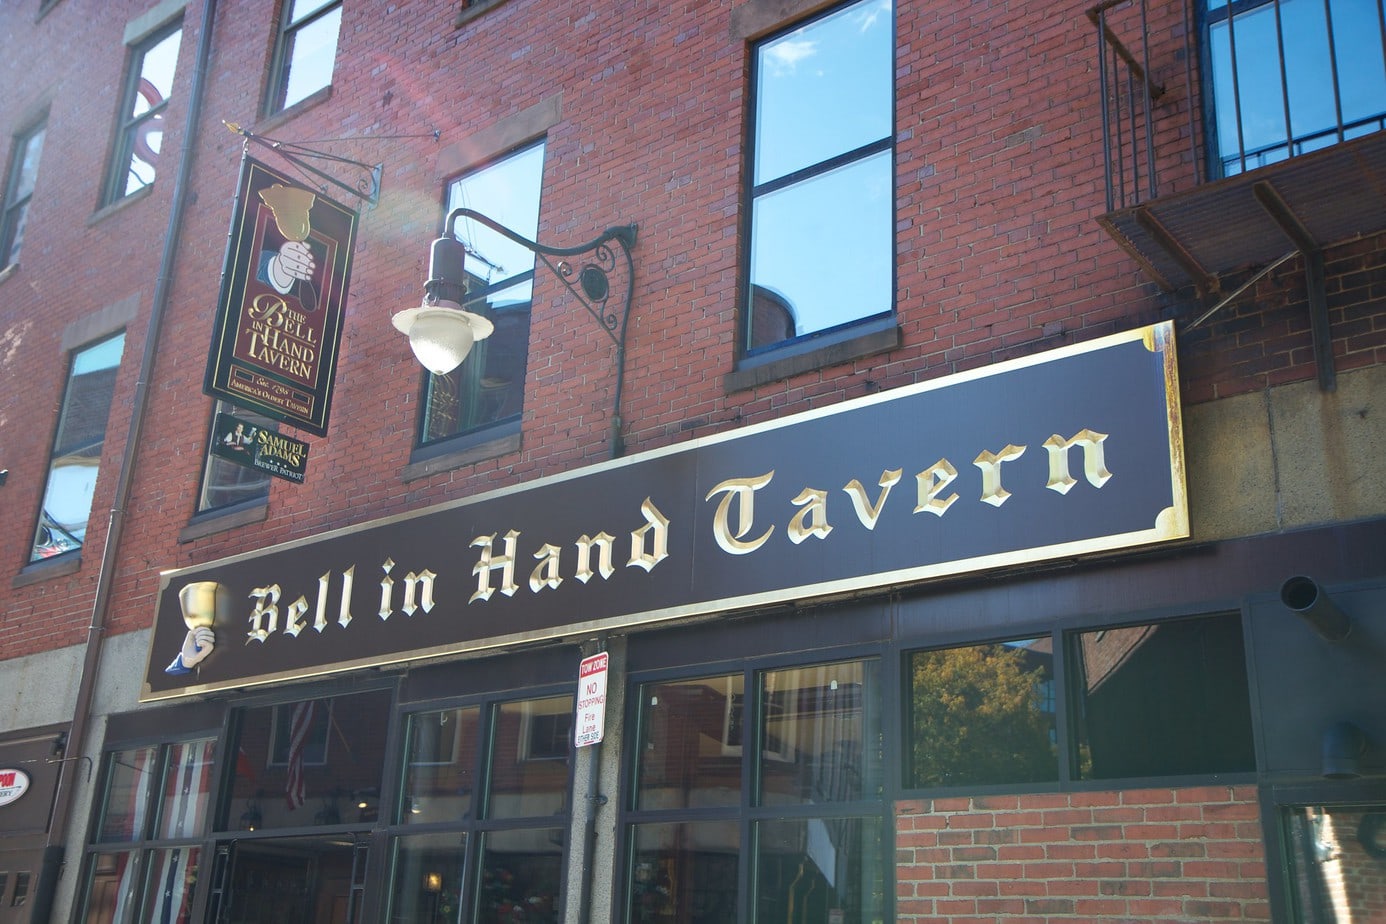 Bell in Hand Tavern